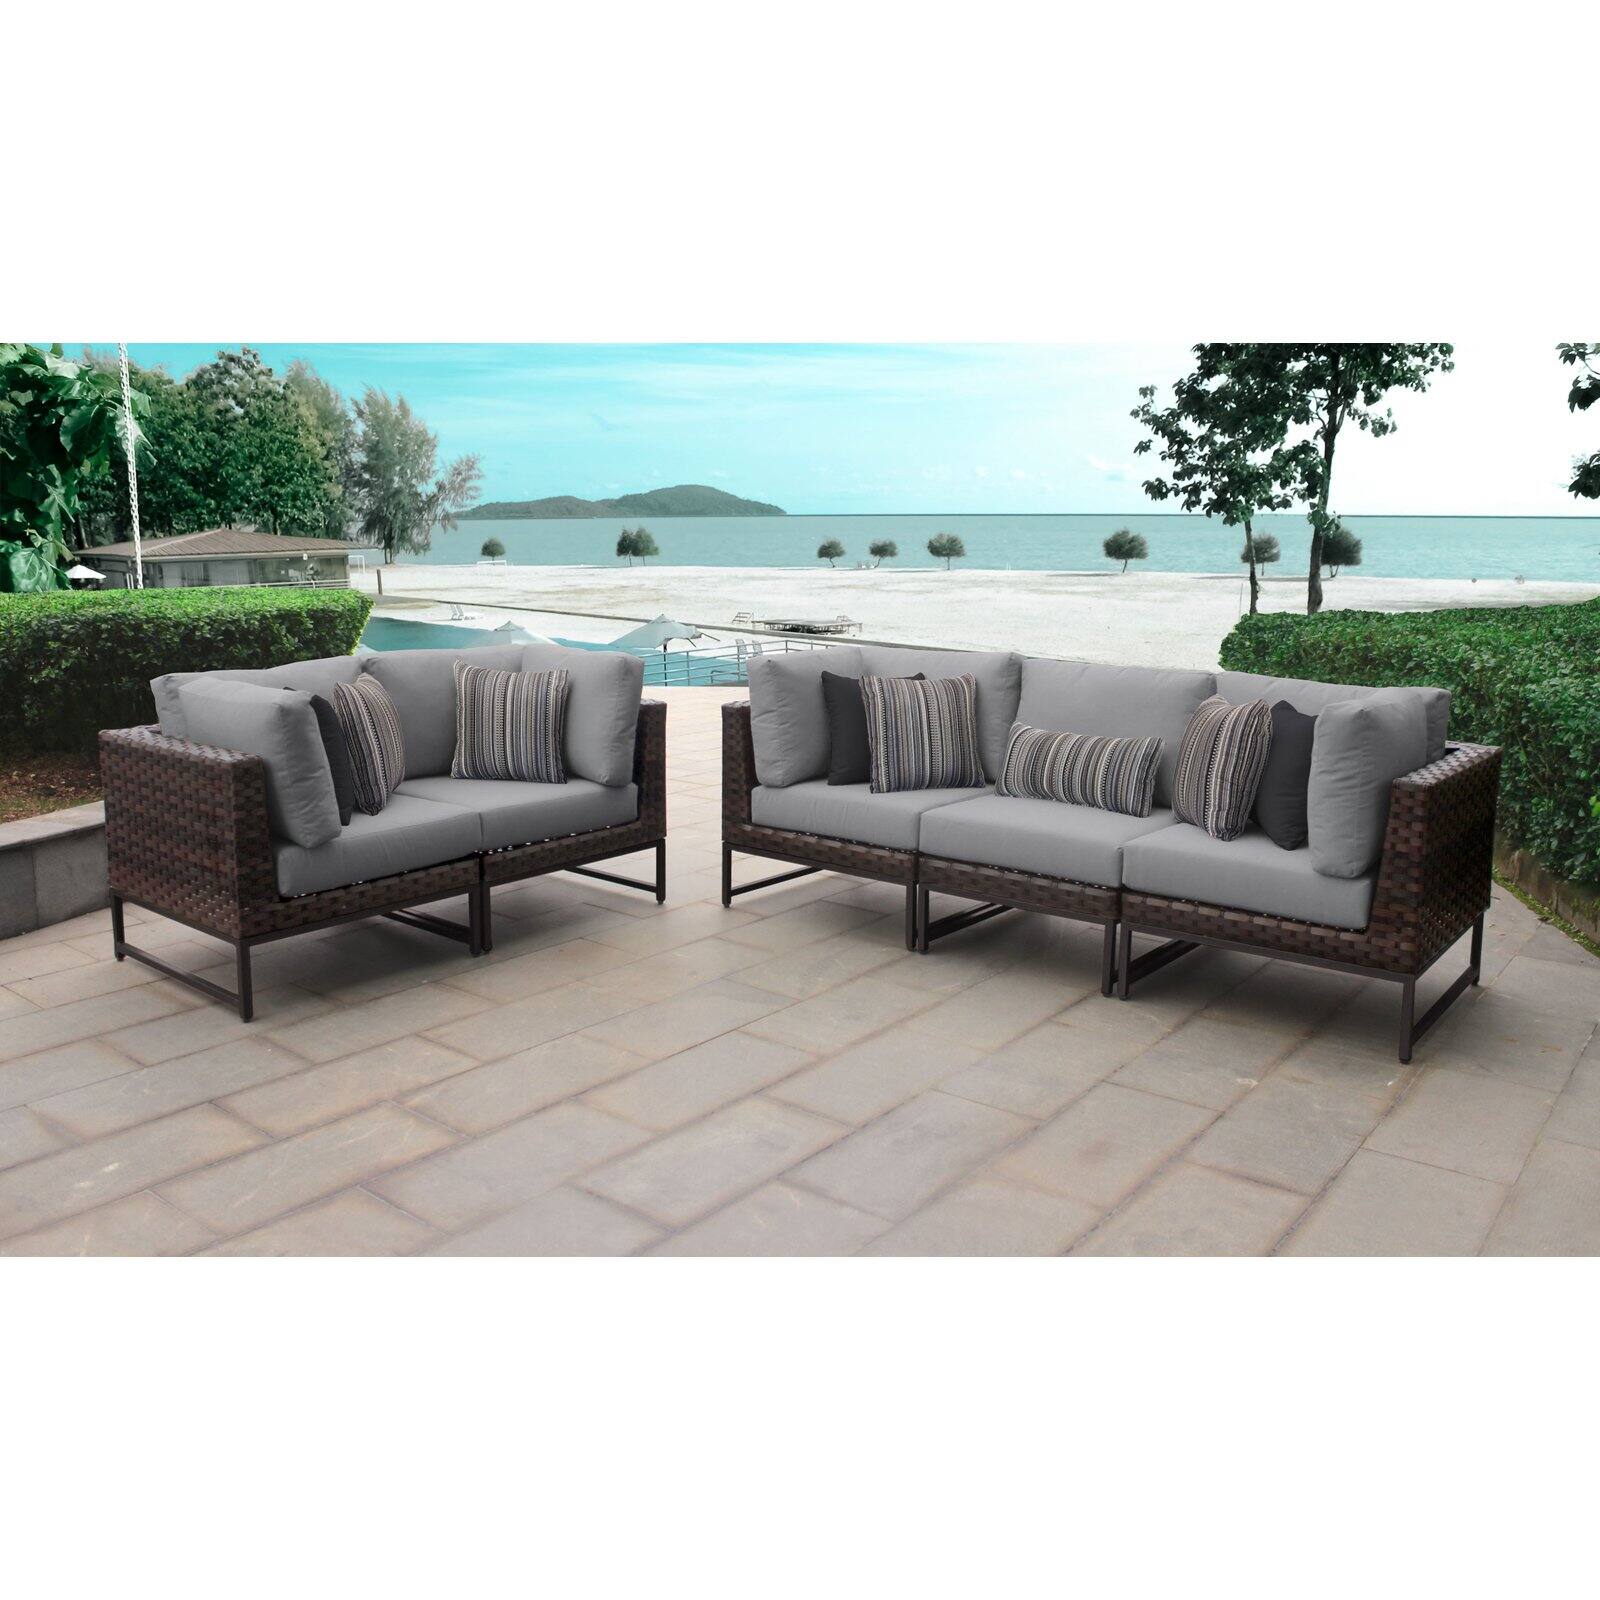 AMALFI 5 Piece Wicker Patio Furniture Set 05a in Gold and Cilantro - image 5 of 11